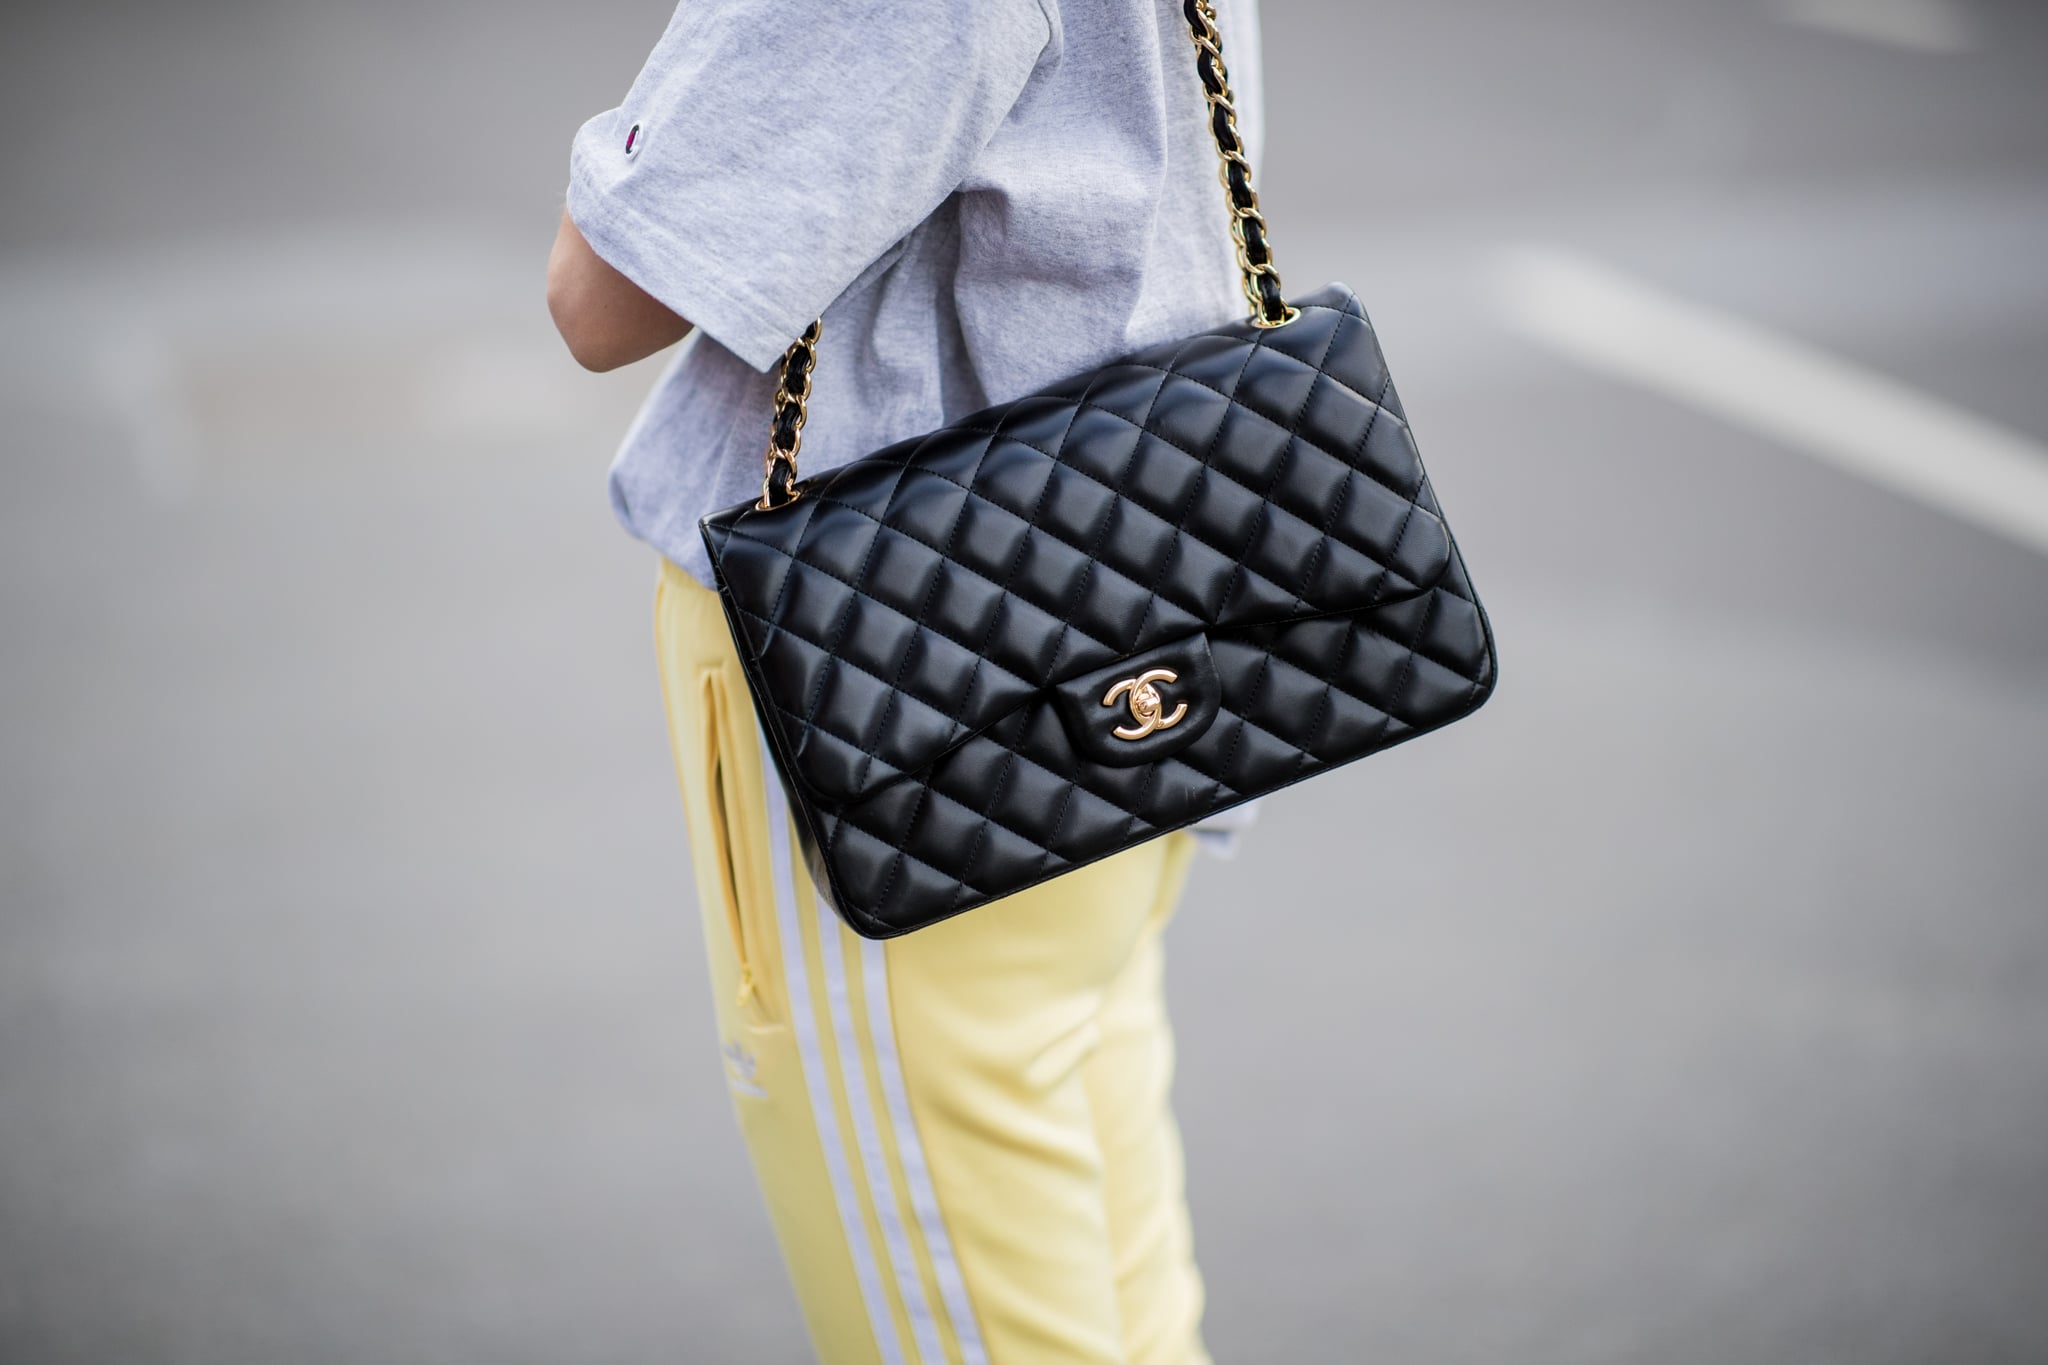 Chanel Investment Bag Guide Sizing and Styles  CODOGIRL